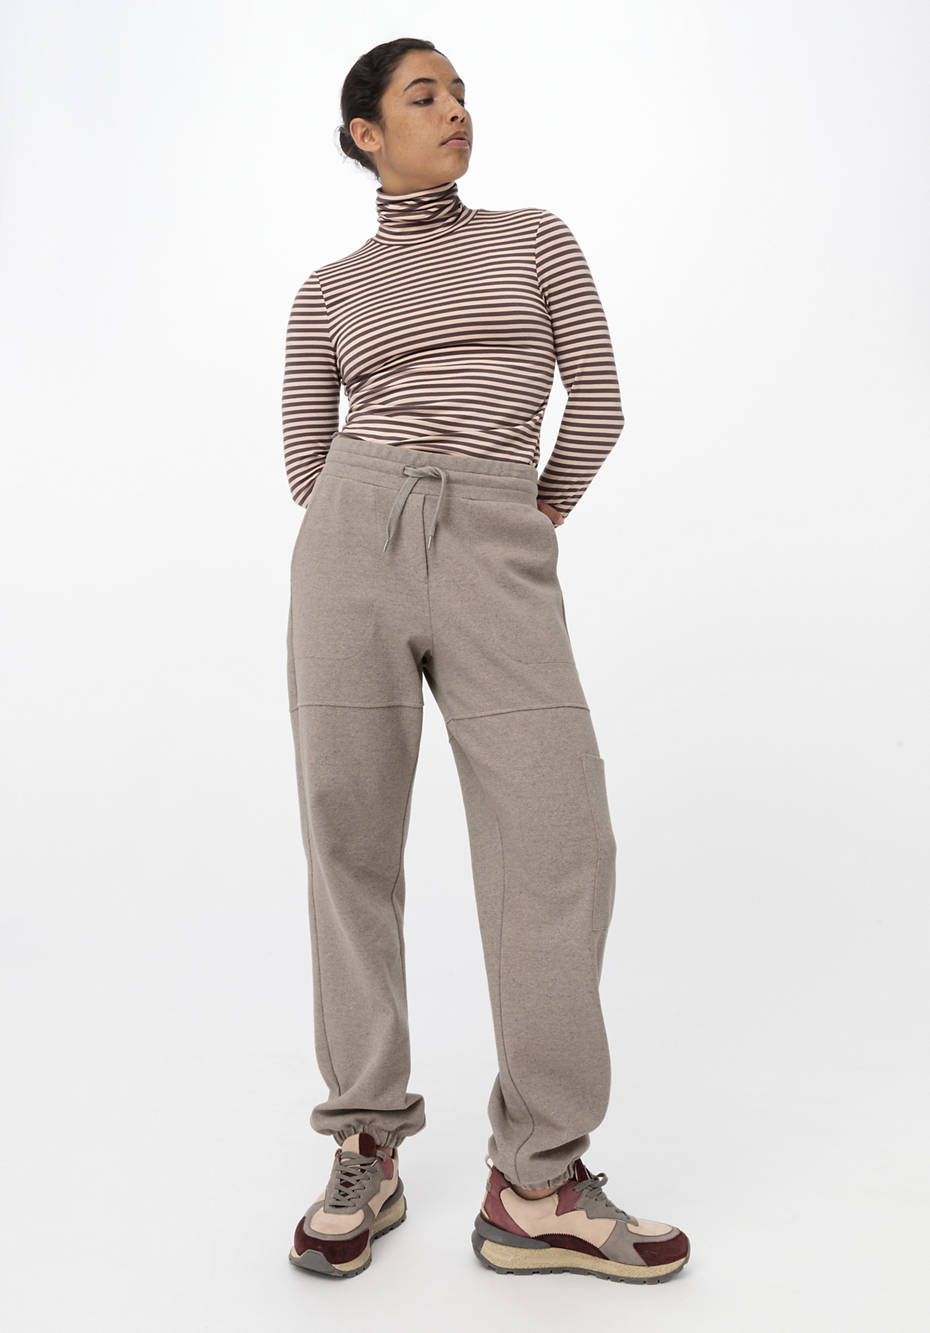 Pants cropped Betterrecycling made of organic cotton